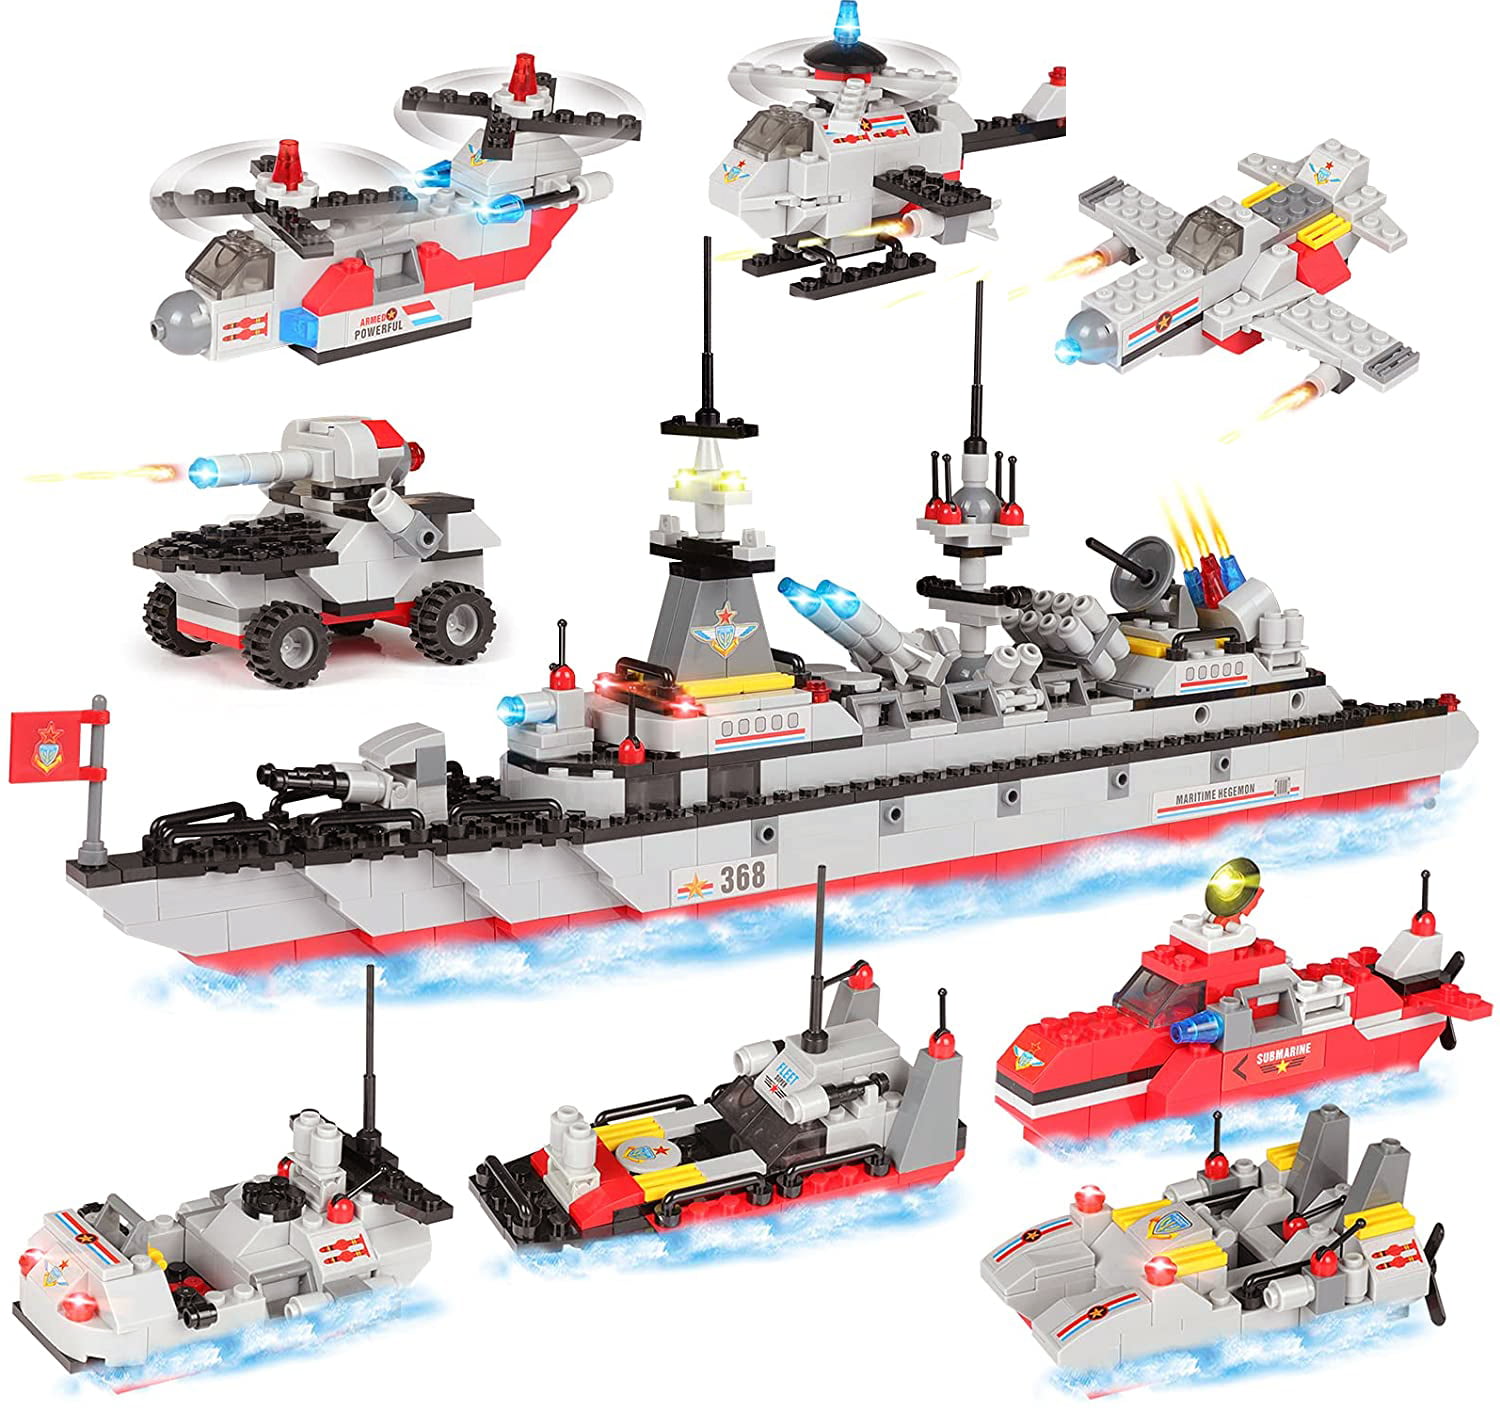 8 in 1 Aircraft Carrier Building Set with Storage Box,Military Battleship Building Toys with Helicopter Patrol Boat Tank,Kids DIY Creative Toy Kit,Gift for Boys Girls 6-12,751PCS